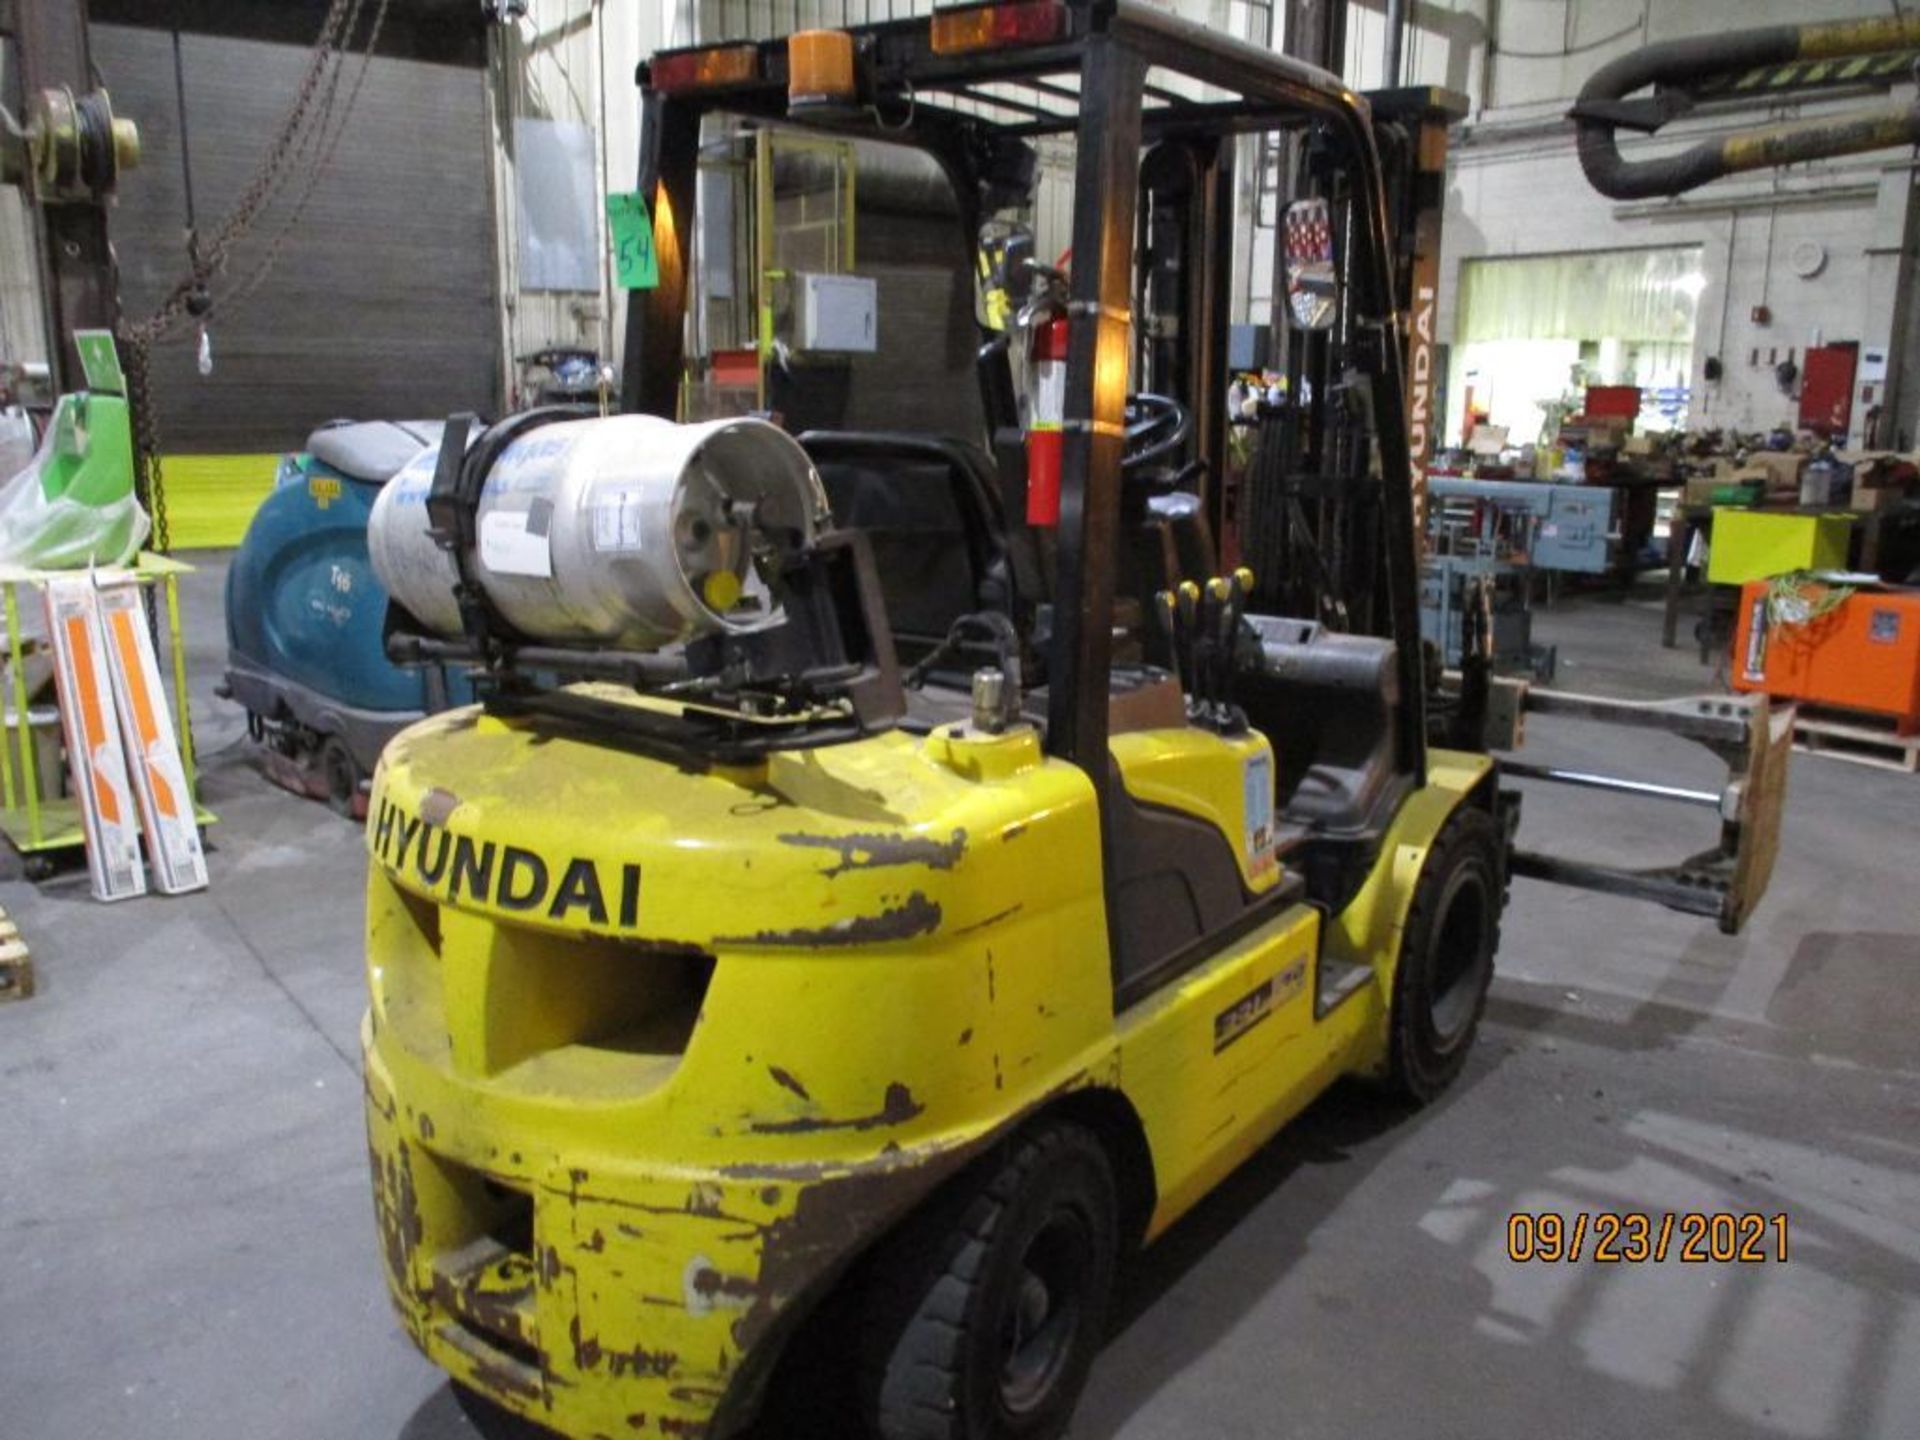 Hyundai 6,500-LPS. Capacity Model 33L-7A LP Gas Forklift Truck S/N: HHKHHF16TD0000080, Side Shift, T - Image 4 of 10